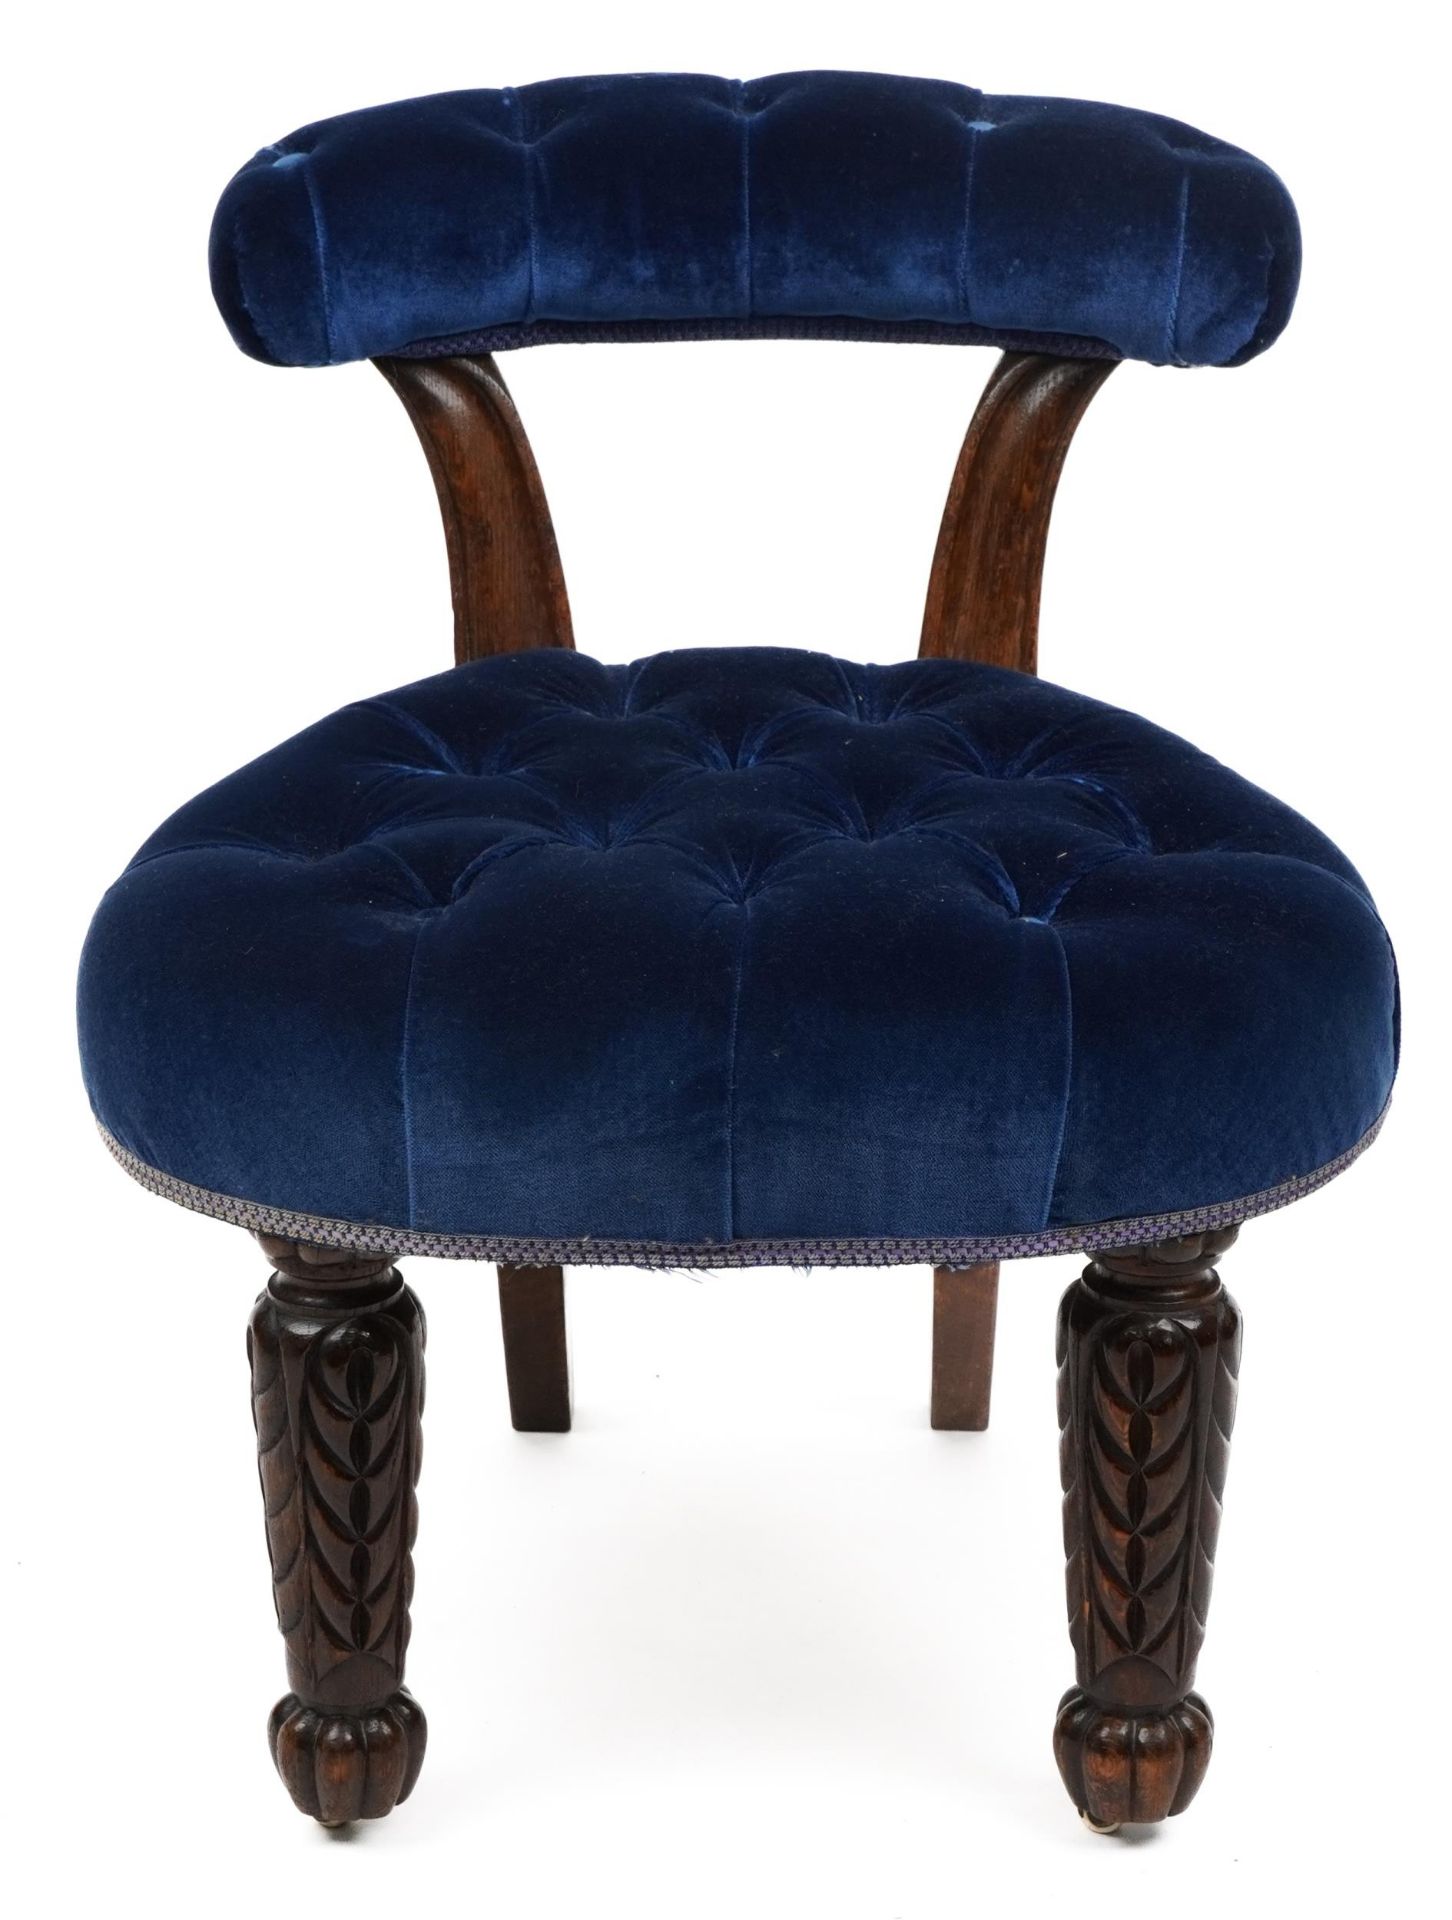 Victorian carved oak bedroom chair with blue button back upholstery, 64cm high : For further - Image 2 of 3